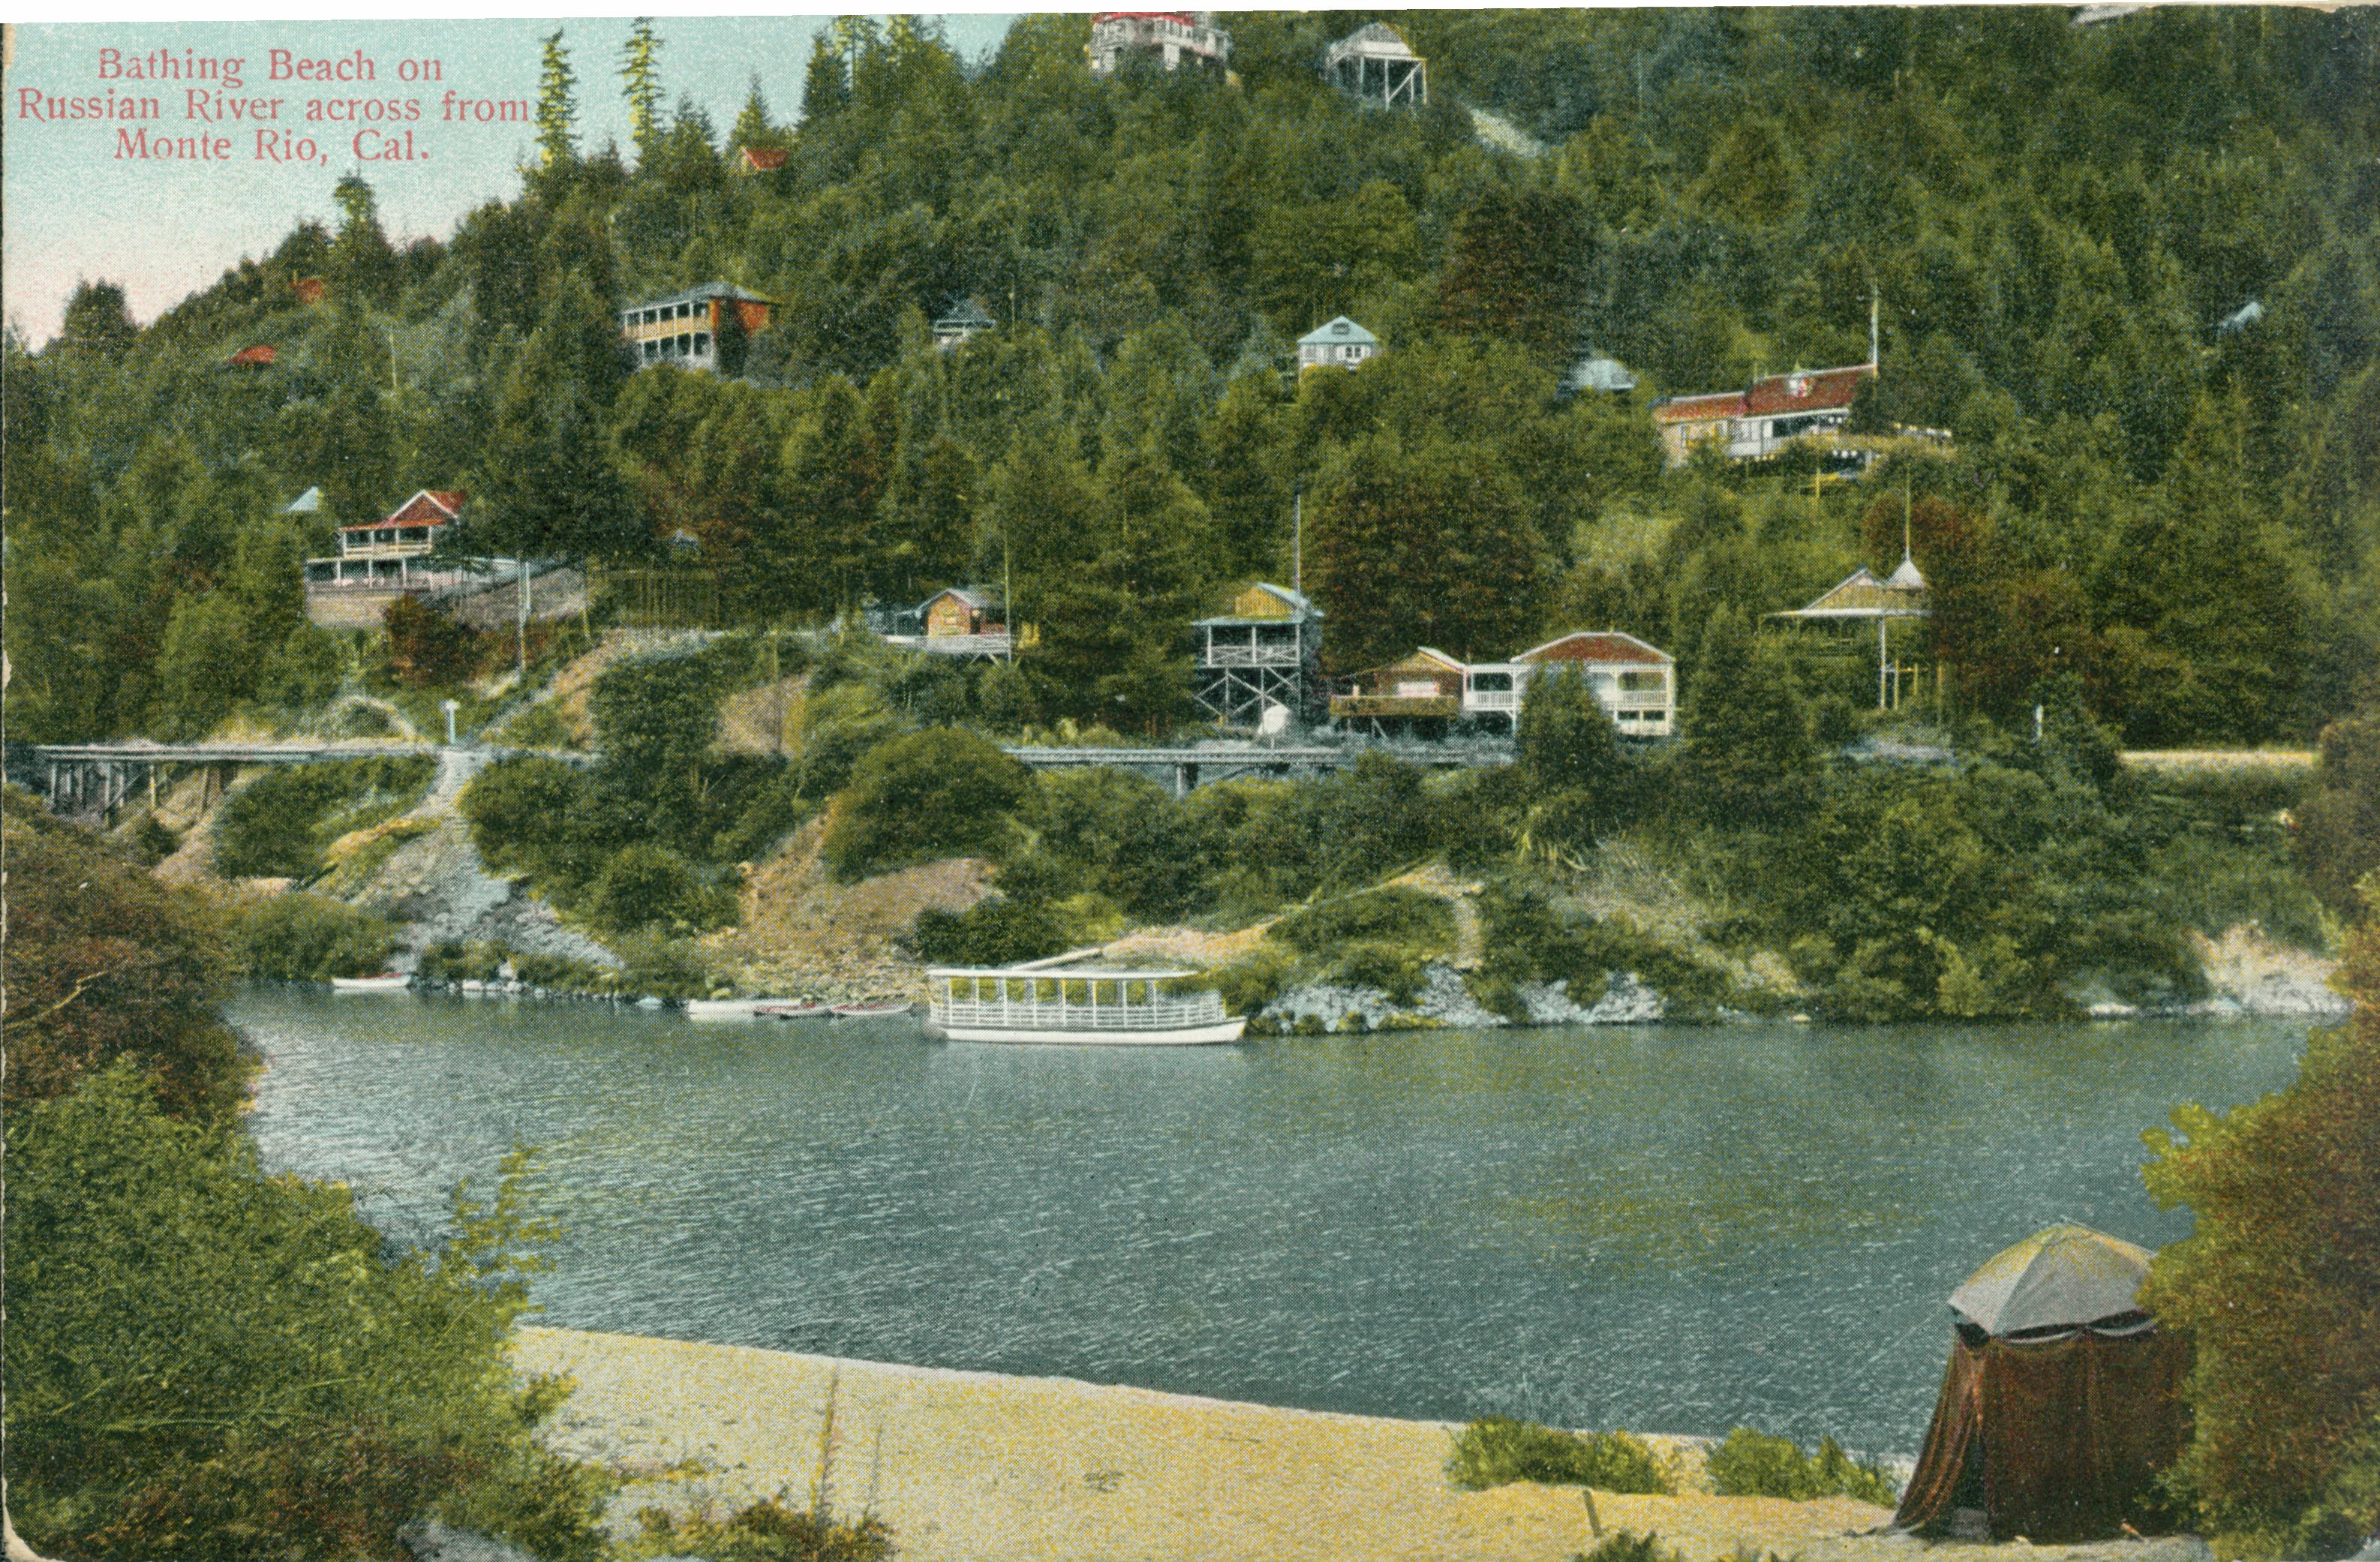 Shows a beach on the shores of the Russian River with Monte Rio's buildings and ferry on the other shore.